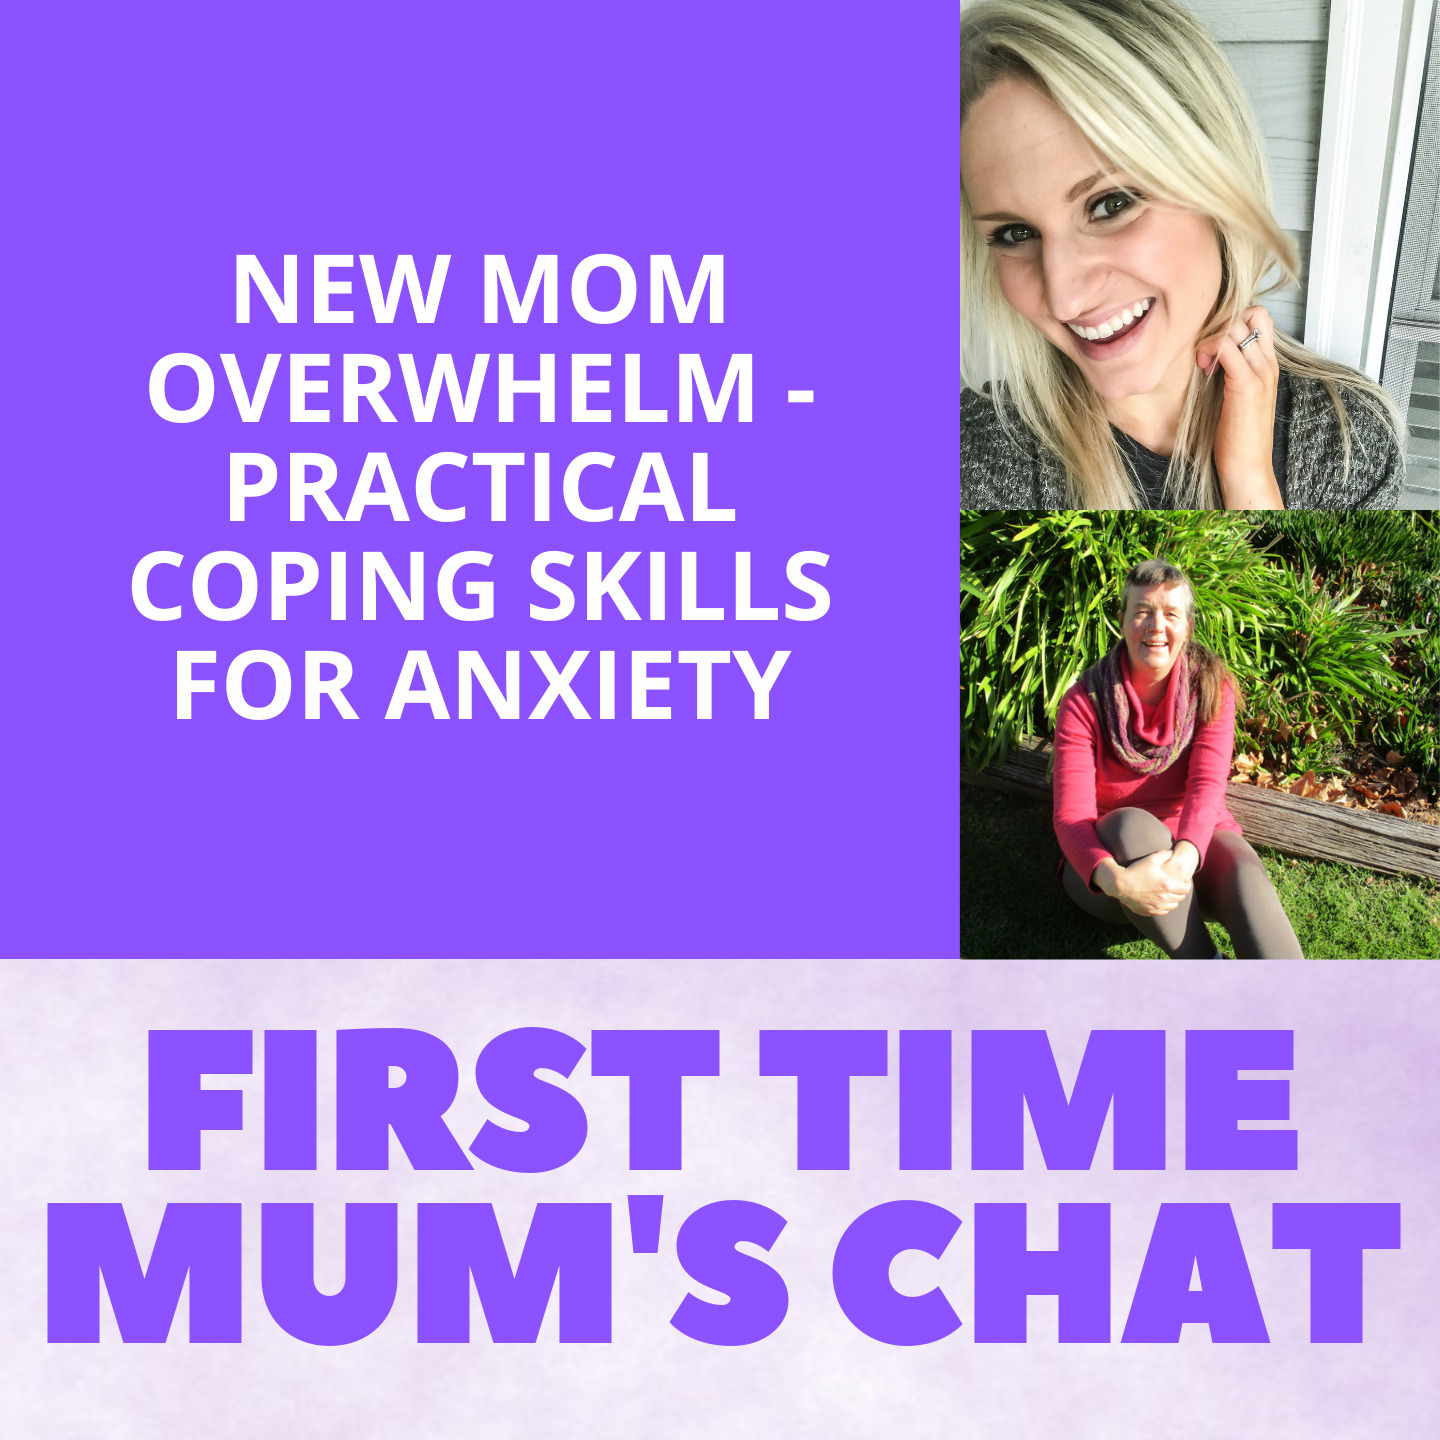 New Mom Overwhelm - Practical Coping Skills For Anxiety